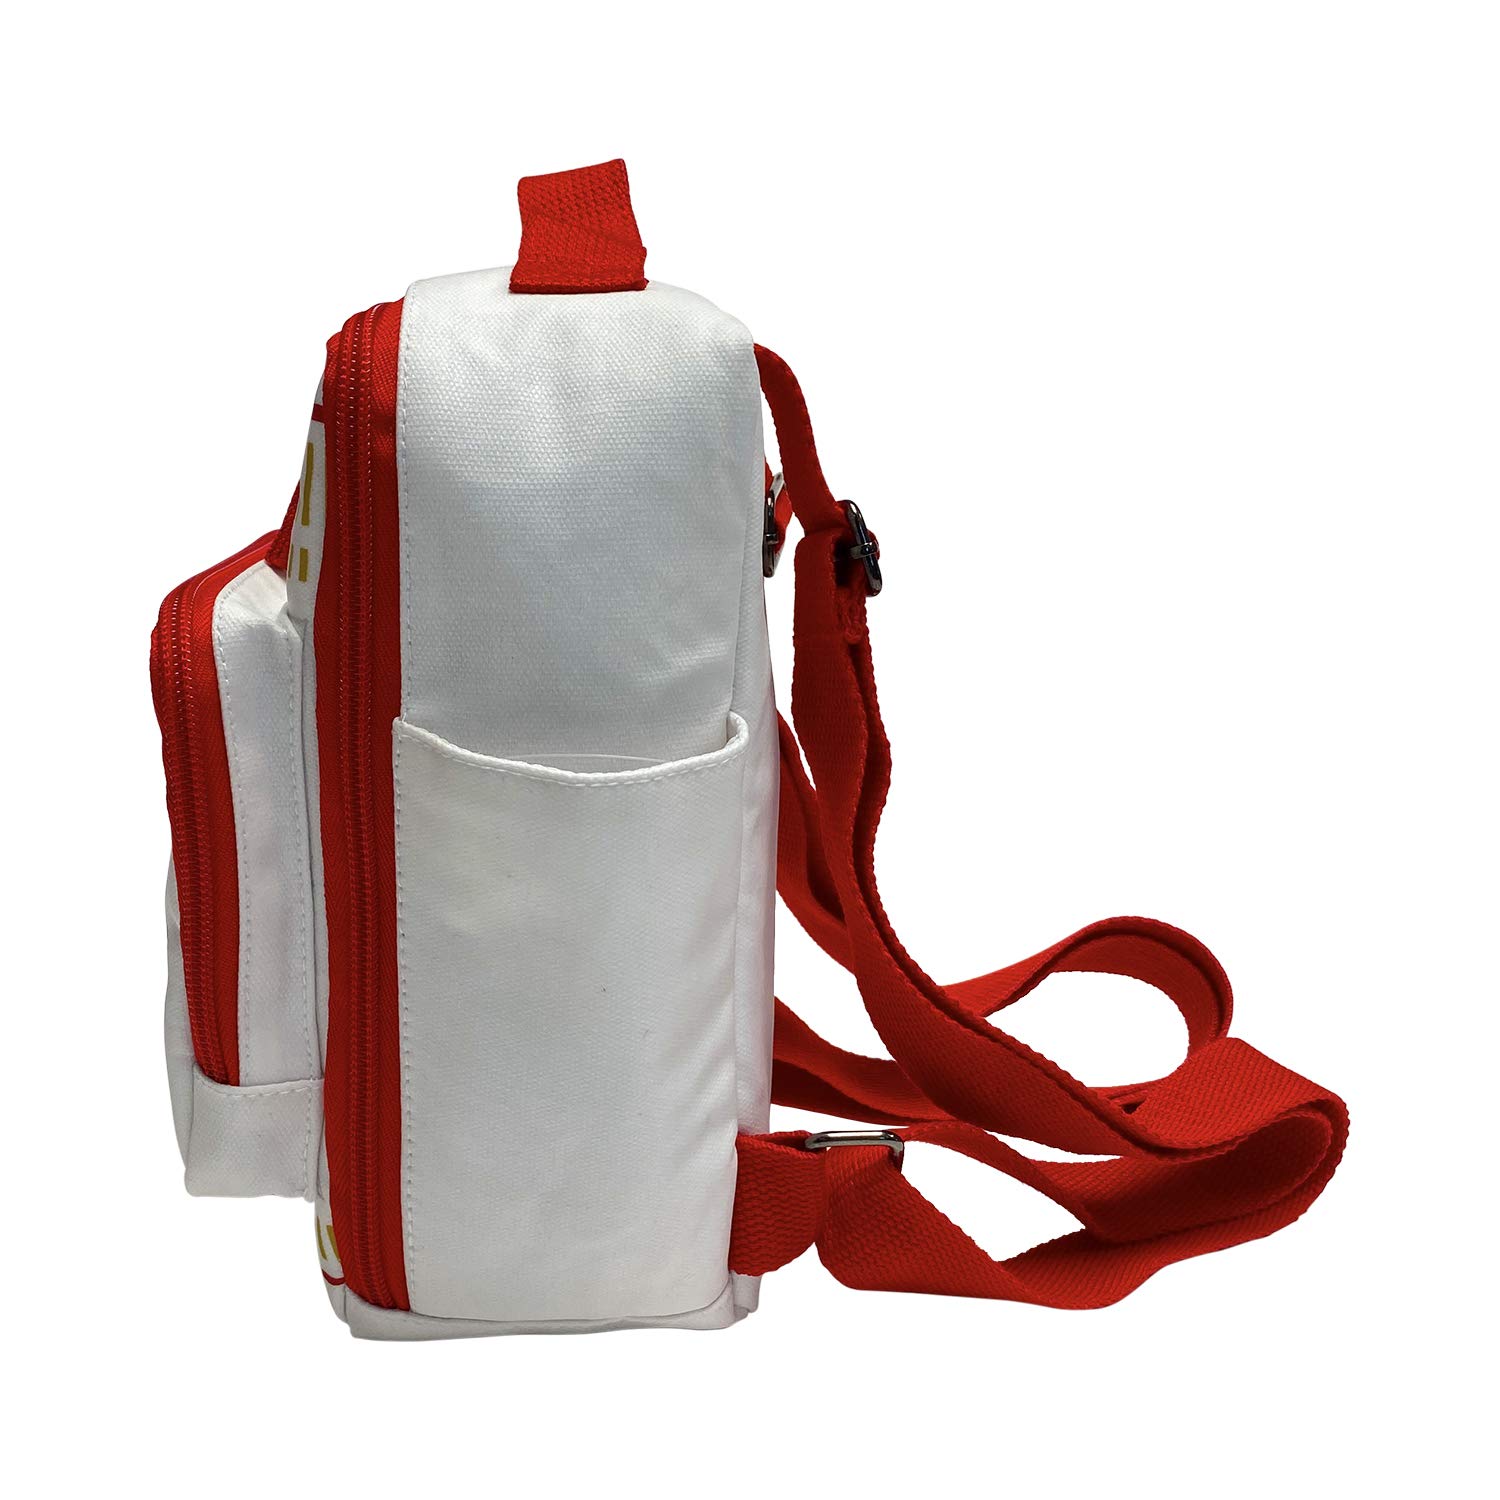 Nissin Cup Noodles Cup Noodles Mini Backpack, Red/White, 7”W x 8”H x 3”D (9607)